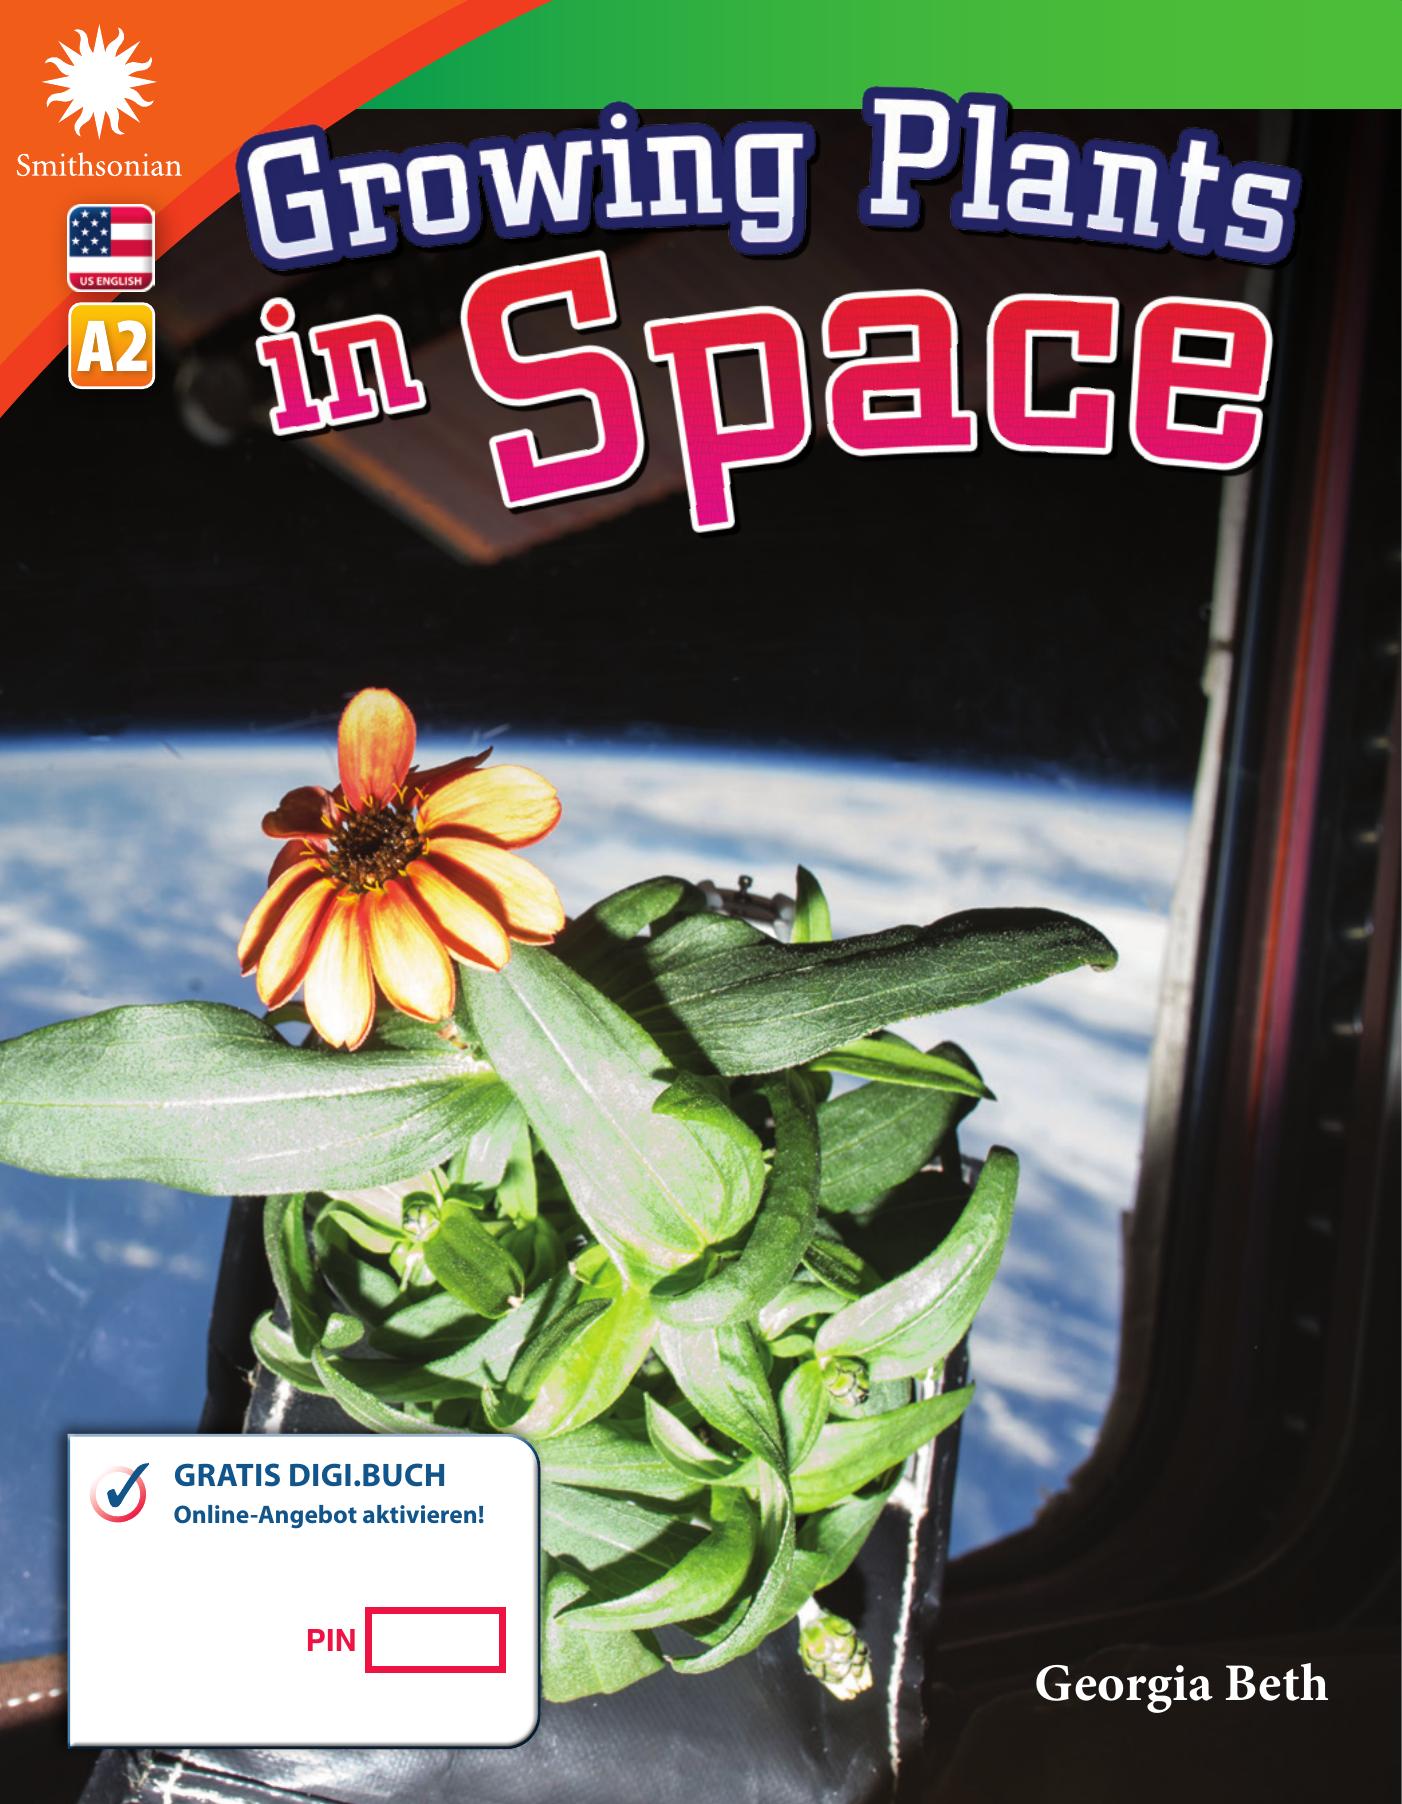 A2 – Growing Plants in Space